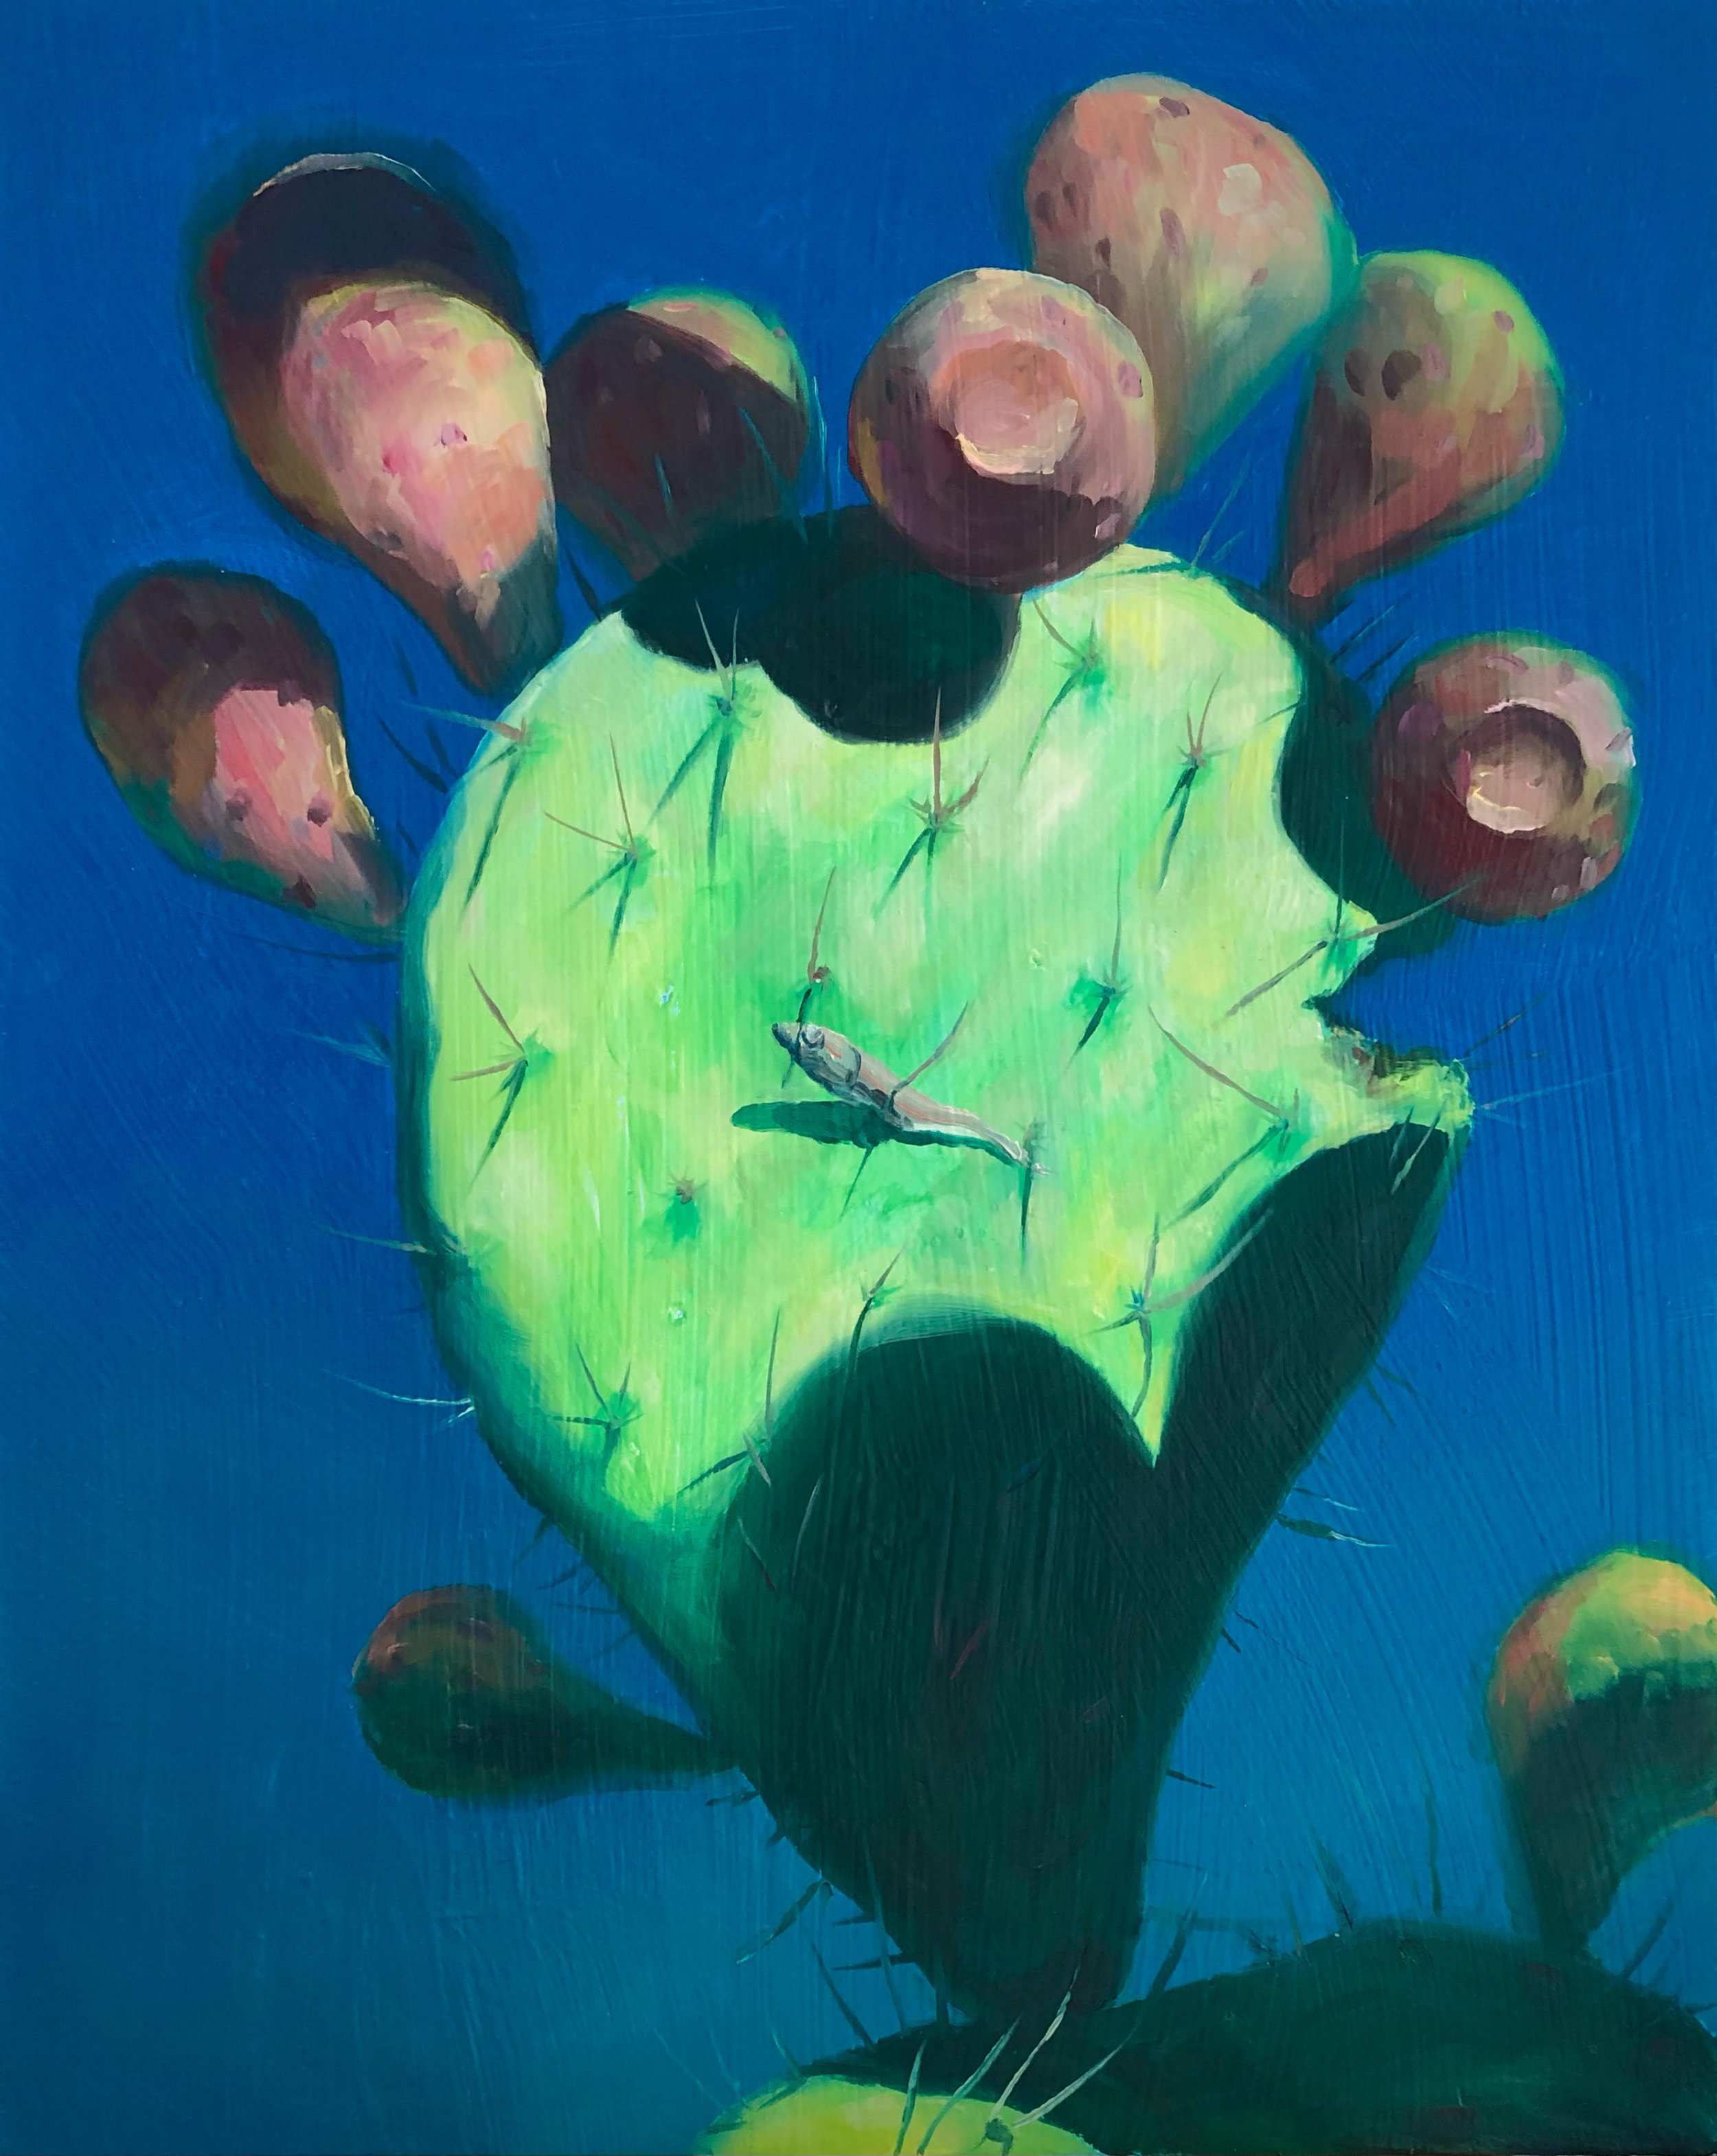   Amy Tidwell,   Myeolchi Pinned to Prickly Pear , 2021, Oil on panel, 20 x 15 1/2 in. 